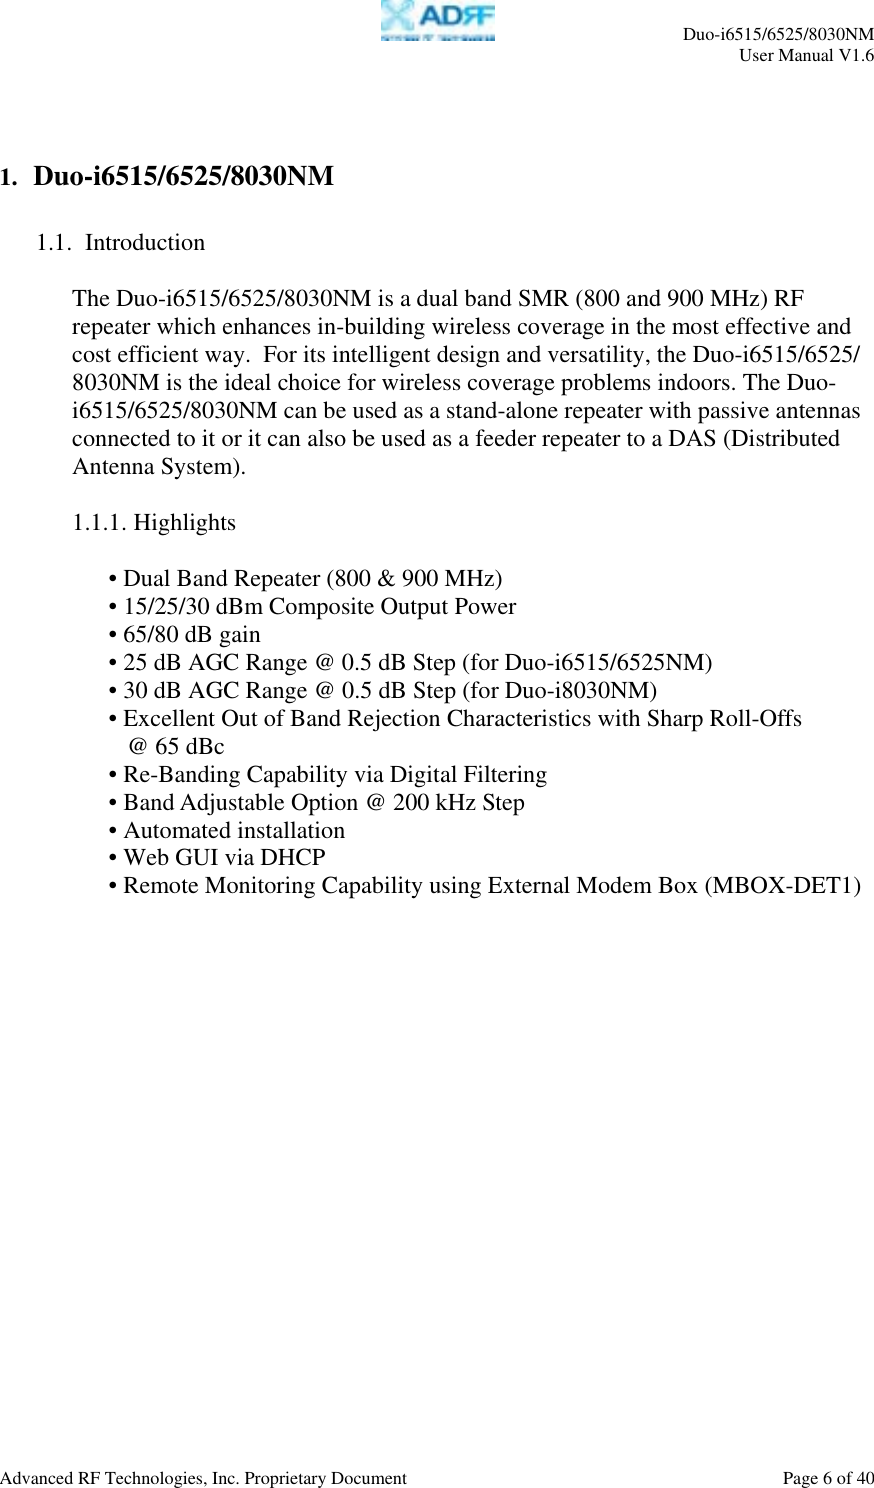     Duo-i6515/6525/8030NM  User Manual V1.6  Advanced RF Technologies, Inc. Proprietary Document    Page 6 of 40    1.  Duo-i6515/6525/8030NM  1.1.  Introduction  The Duo-i6515/6525/8030NM is a dual band SMR (800 and 900 MHz) RF repeater which enhances in-building wireless coverage in the most effective and cost efficient way.  For its intelligent design and versatility, the Duo-i6515/6525/ 8030NM is the ideal choice for wireless coverage problems indoors. The Duo-i6515/6525/8030NM can be used as a stand-alone repeater with passive antennas connected to it or it can also be used as a feeder repeater to a DAS (Distributed Antenna System).  1.1.1. Highlights  • Dual Band Repeater (800 &amp; 900 MHz) • 15/25/30 dBm Composite Output Power • 65/80 dB gain • 25 dB AGC Range @ 0.5 dB Step (for Duo-i6515/6525NM) • 30 dB AGC Range @ 0.5 dB Step (for Duo-i8030NM) • Excellent Out of Band Rejection Characteristics with Sharp Roll-Offs     @ 65 dBc • Re-Banding Capability via Digital Filtering • Band Adjustable Option @ 200 kHz Step • Automated installation • Web GUI via DHCP  • Remote Monitoring Capability using External Modem Box (MBOX-DET1)   